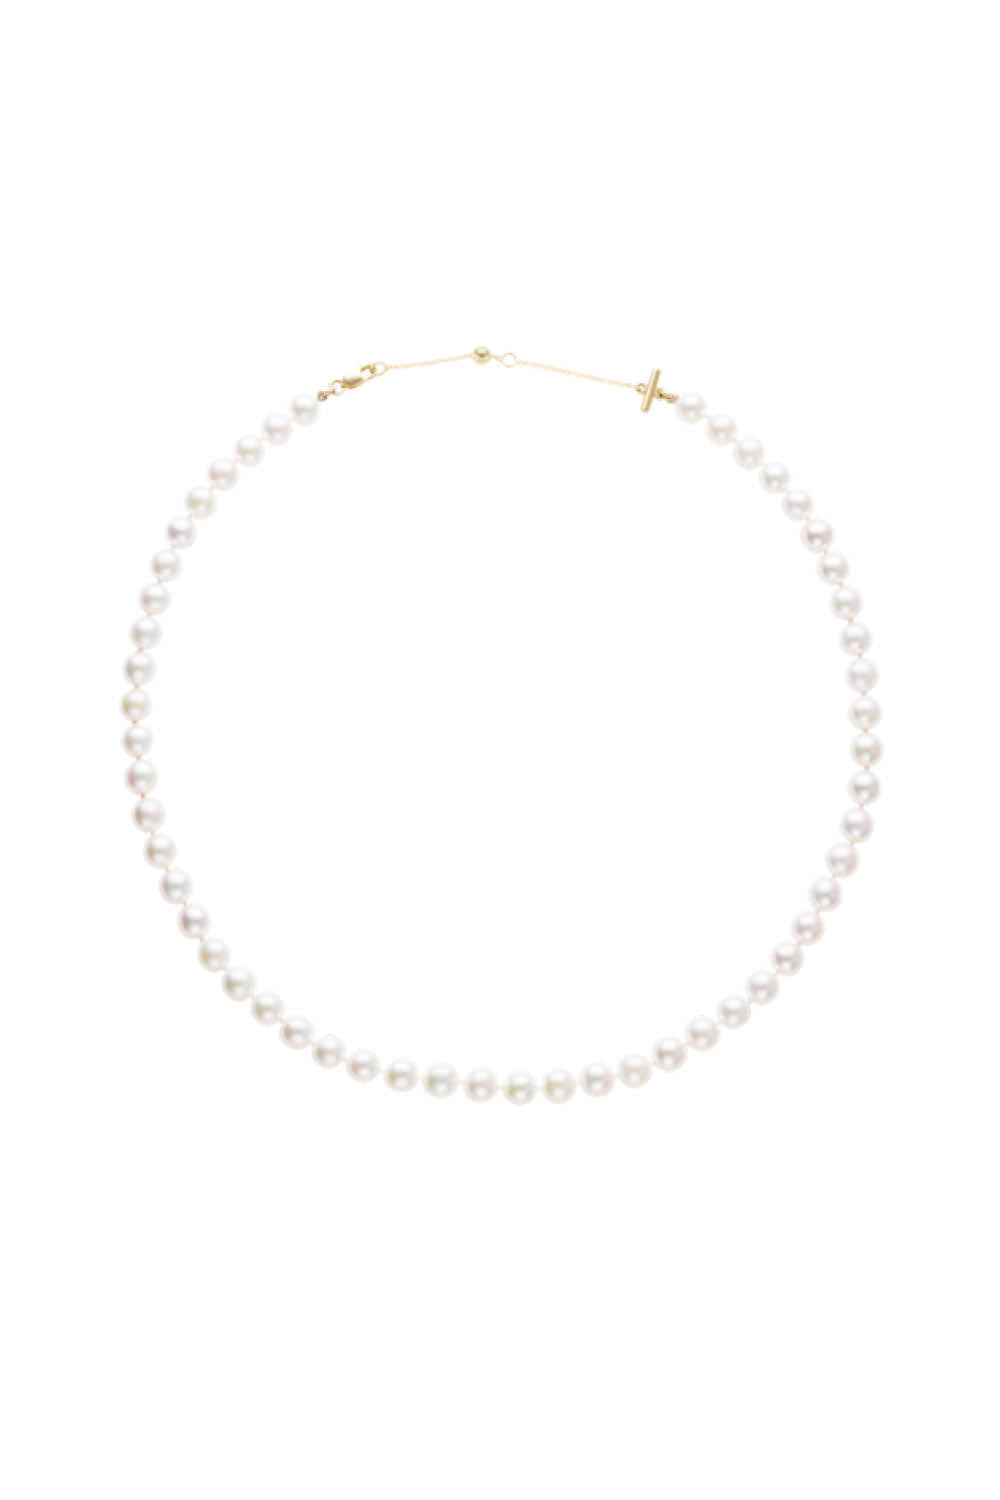 Akoya Pearl Strand Necklace in Yellow Gold